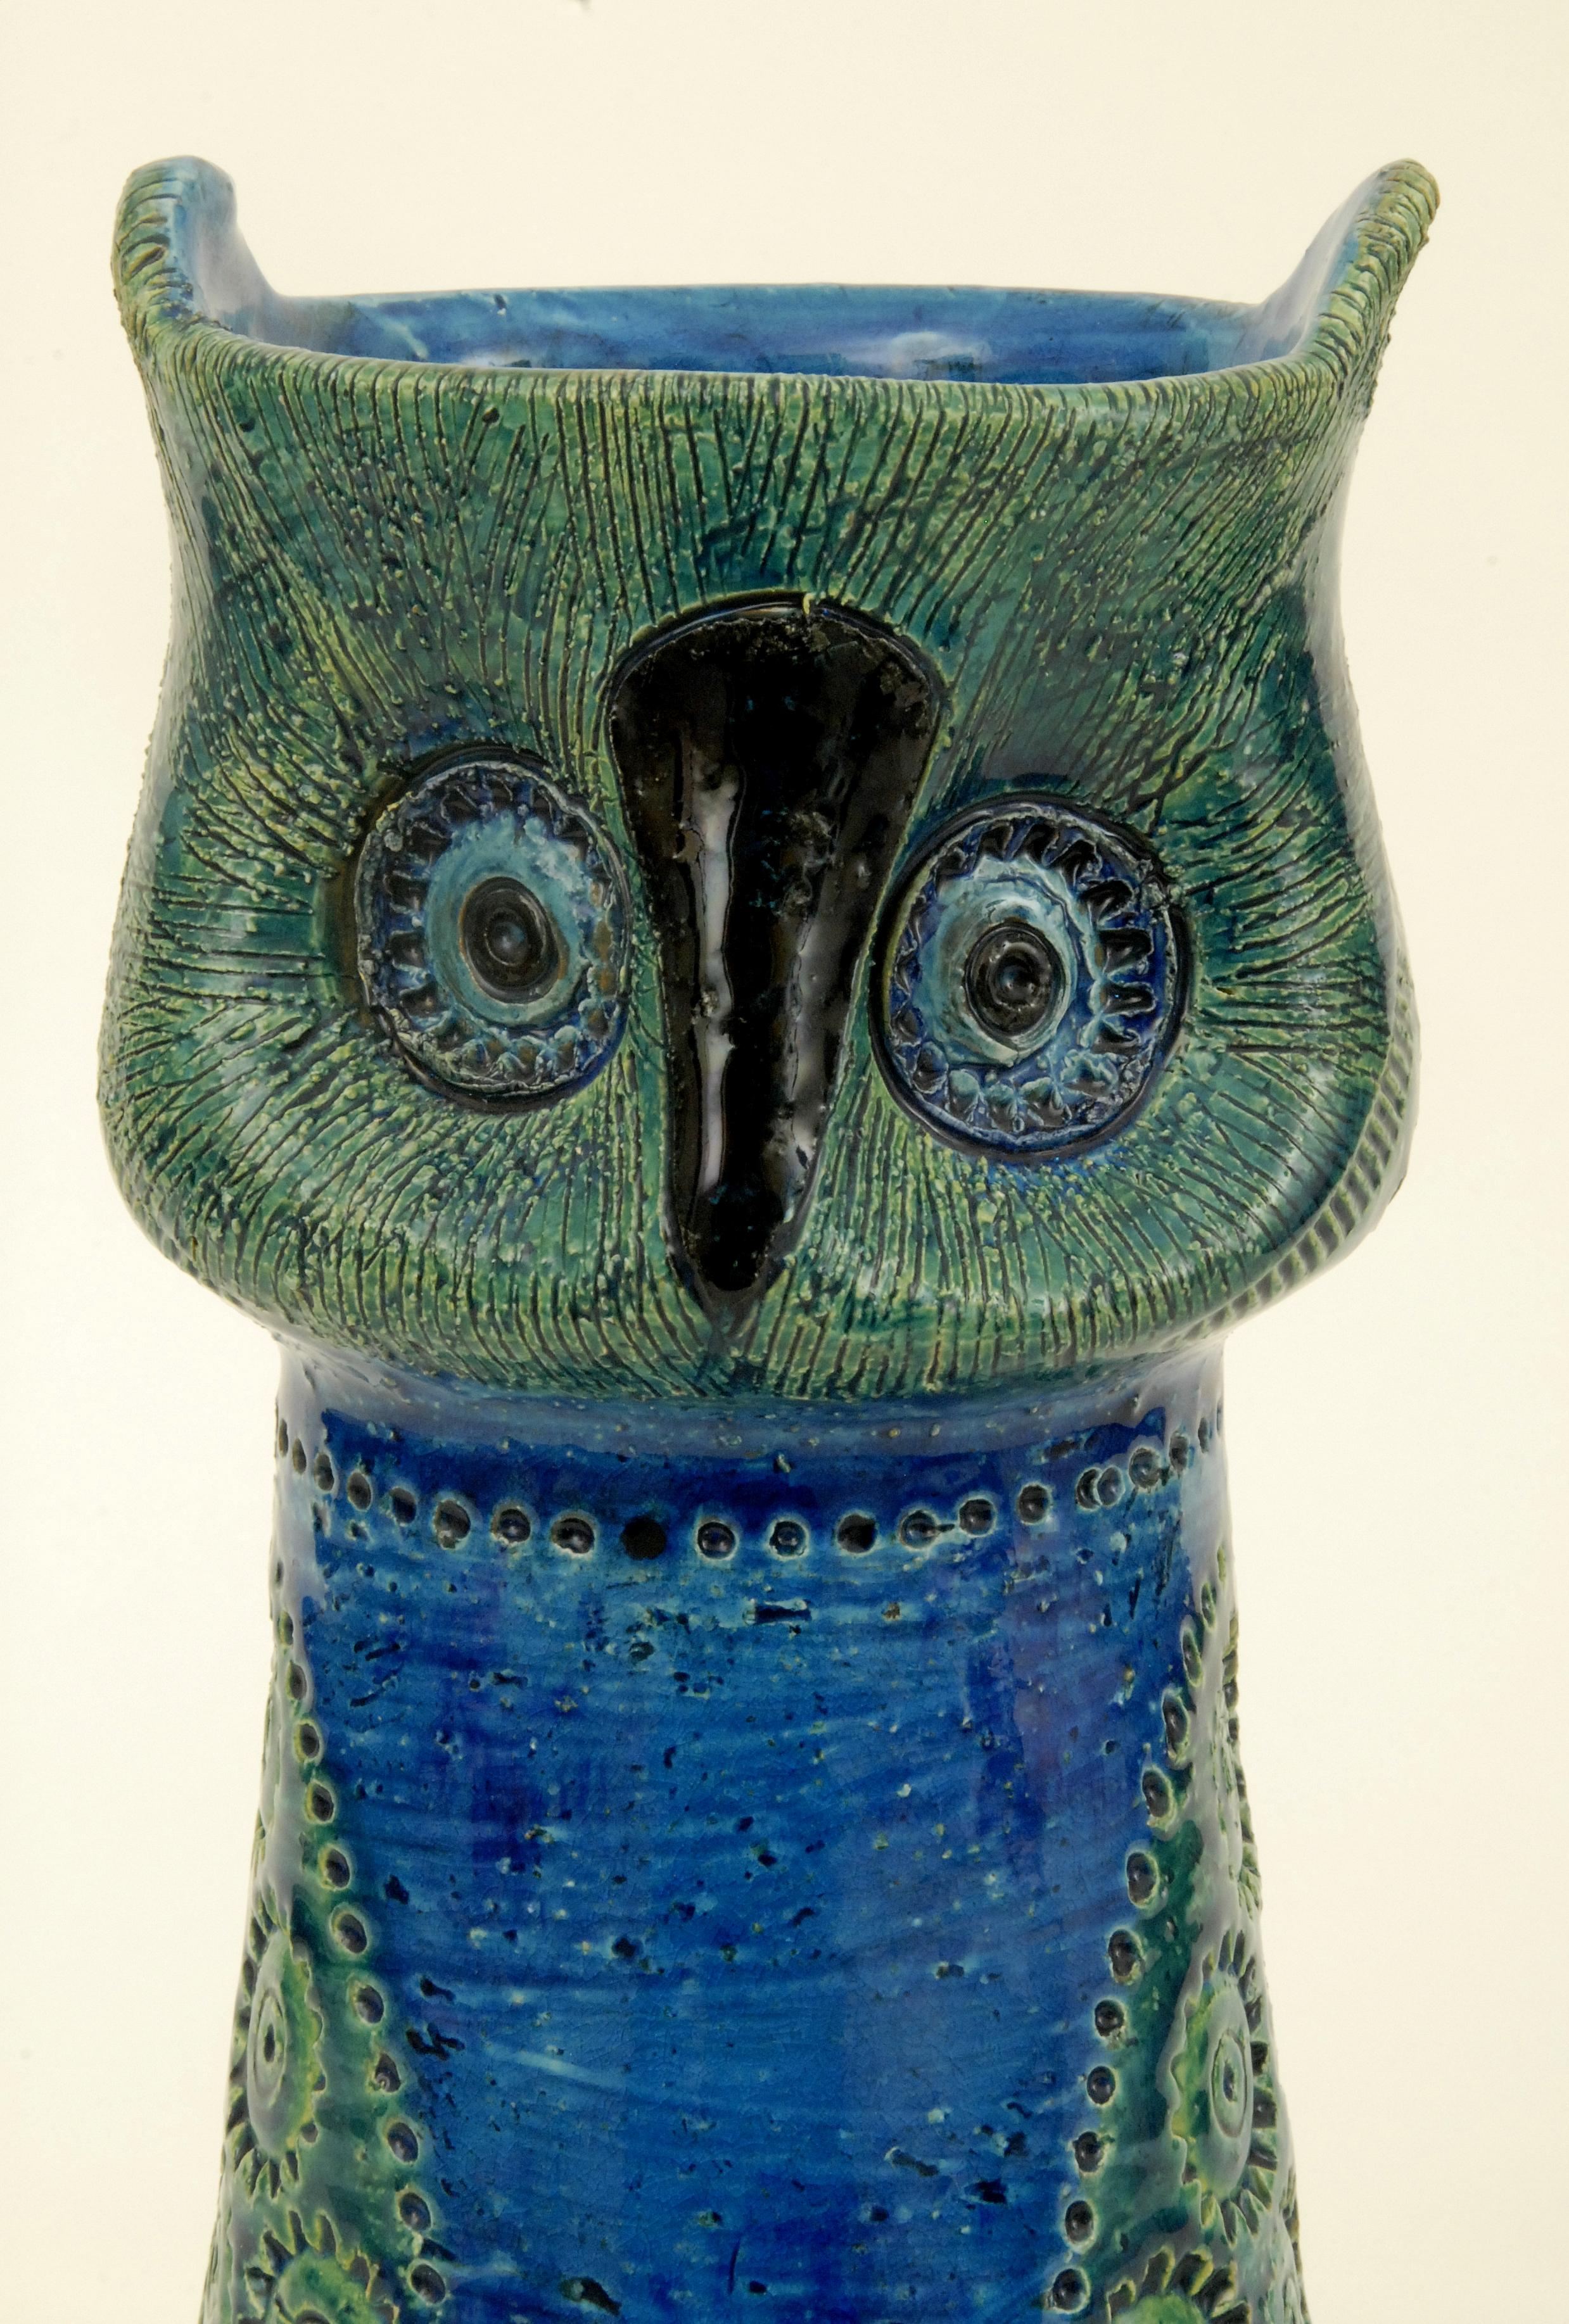 A large Aldo Londi designed owl ['Gufo'] slip-cast vase, designed in 1963 with mottled glazes, impressed star motifs and dots and scraffito lines. The base with a Rosenthal-Netter paper label and impressed stamp 'Made in Italy' and black under glaze